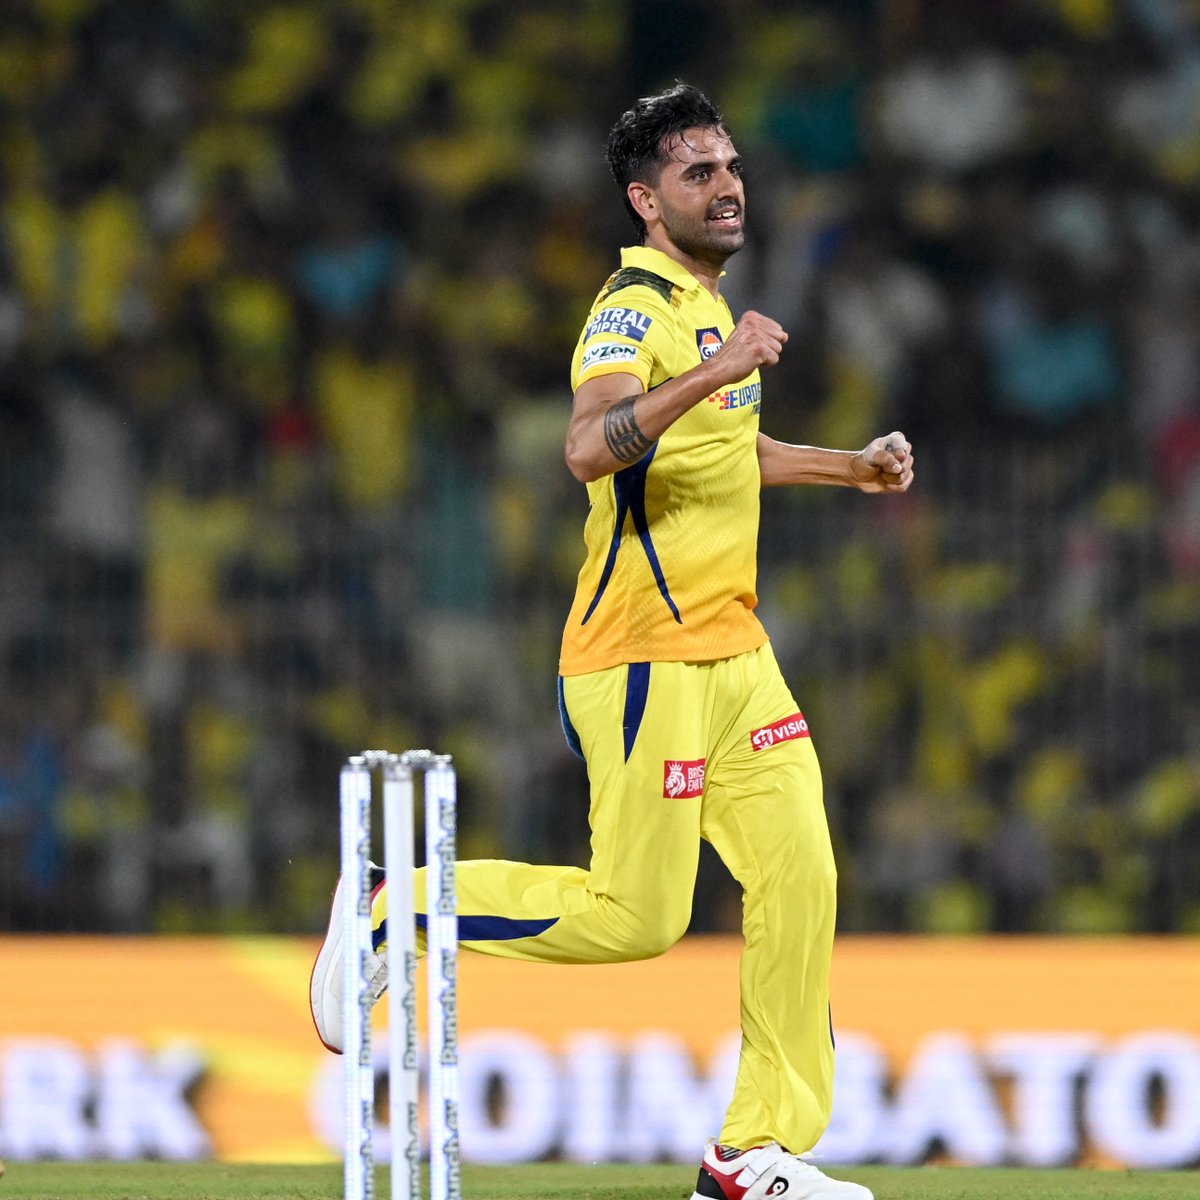 The perfect start to the second innings for CSK - QDK drags onto his stumps, out for a duck! es.pn/IPL24-M39 | #CSKvLSG | #IPL2024